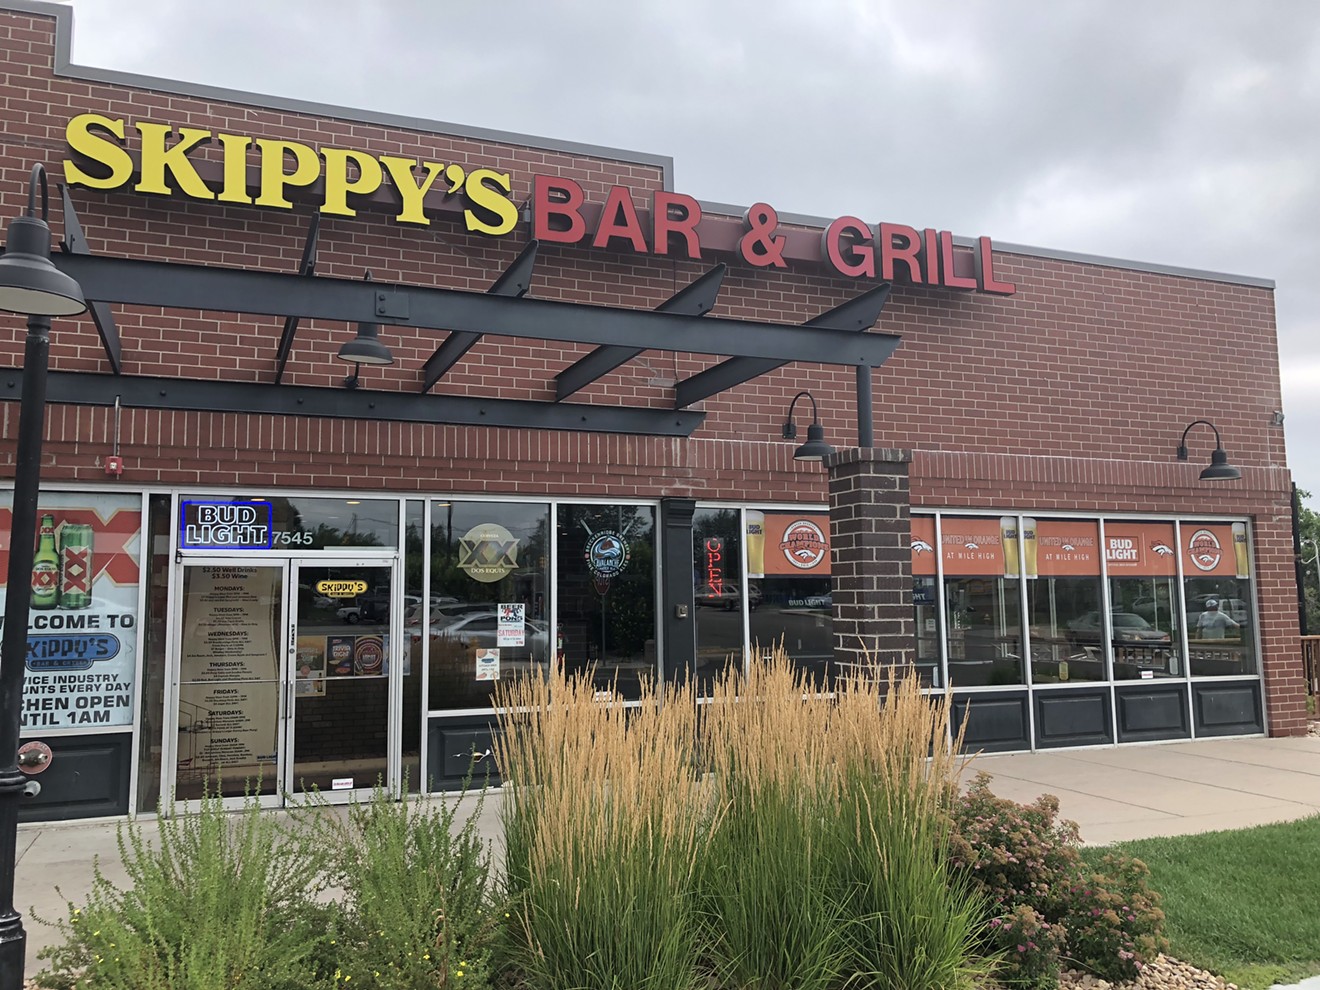 Skippy's Bar & Grill is tucked into the back corner of the Central Park Shopping Center near the corner of Iliff and Quebec.